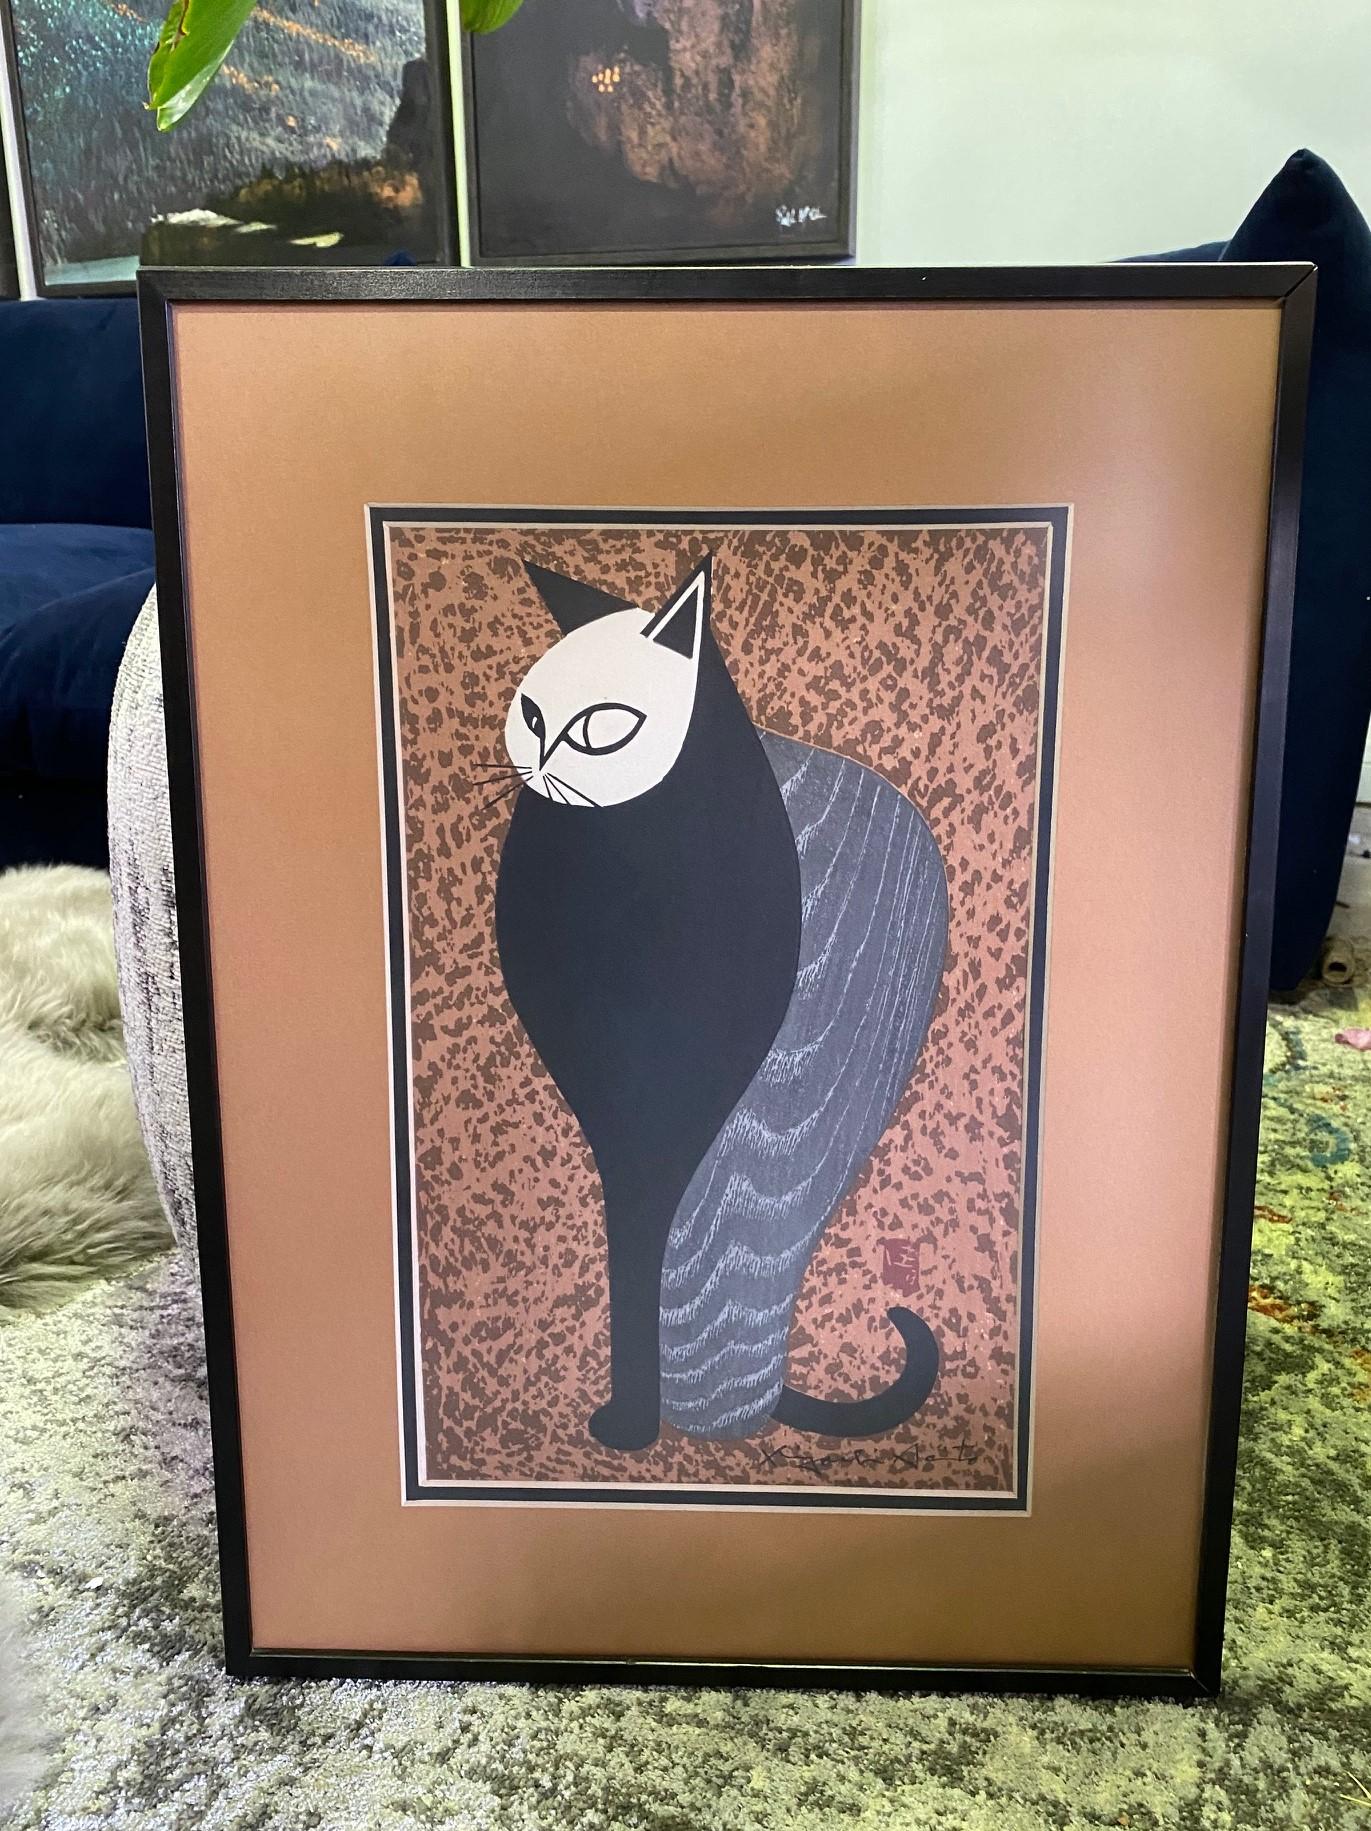 A wonderfully composed woodblock print by famed Japanese printmaker Kiyoshi Saito. Many consider Saito to be one of the most important, if not the most important, contemporary Japanese printmakers of the 20th century. Saito's cat prints are some of